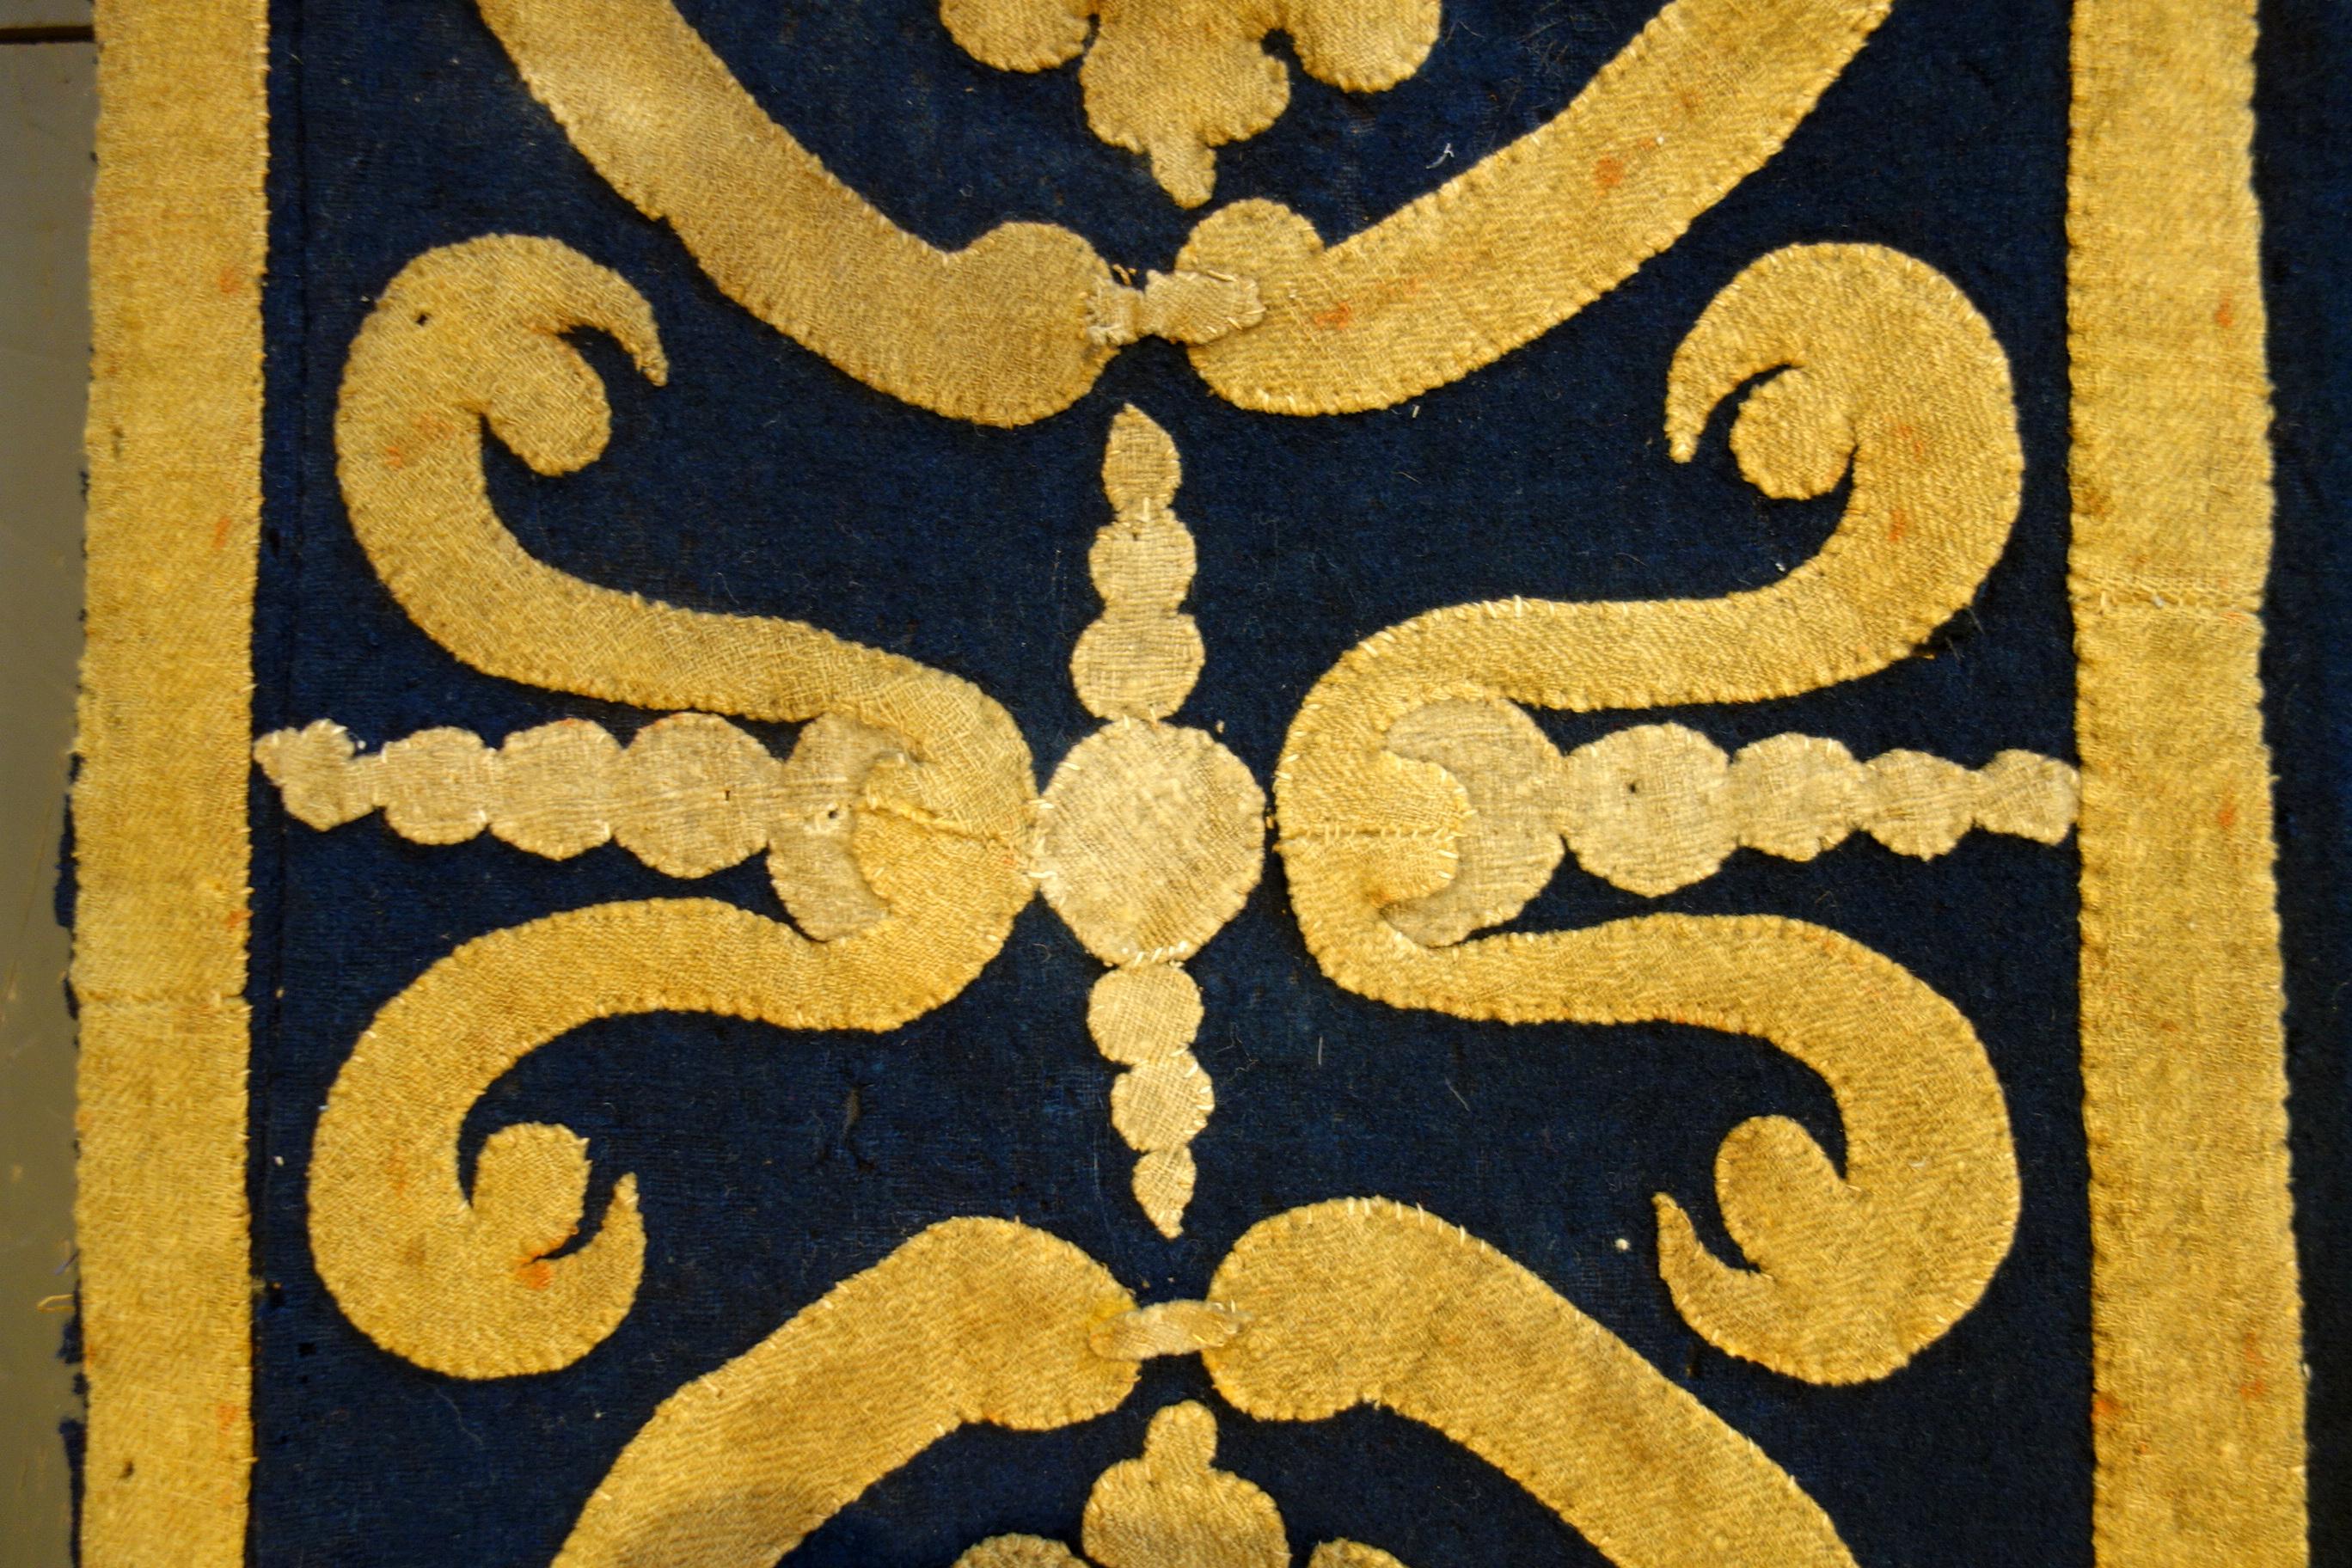 Late 17th Century Italian Heraldic Coat of Arms Tapestry, Lucca, circa 1690 For Sale 7